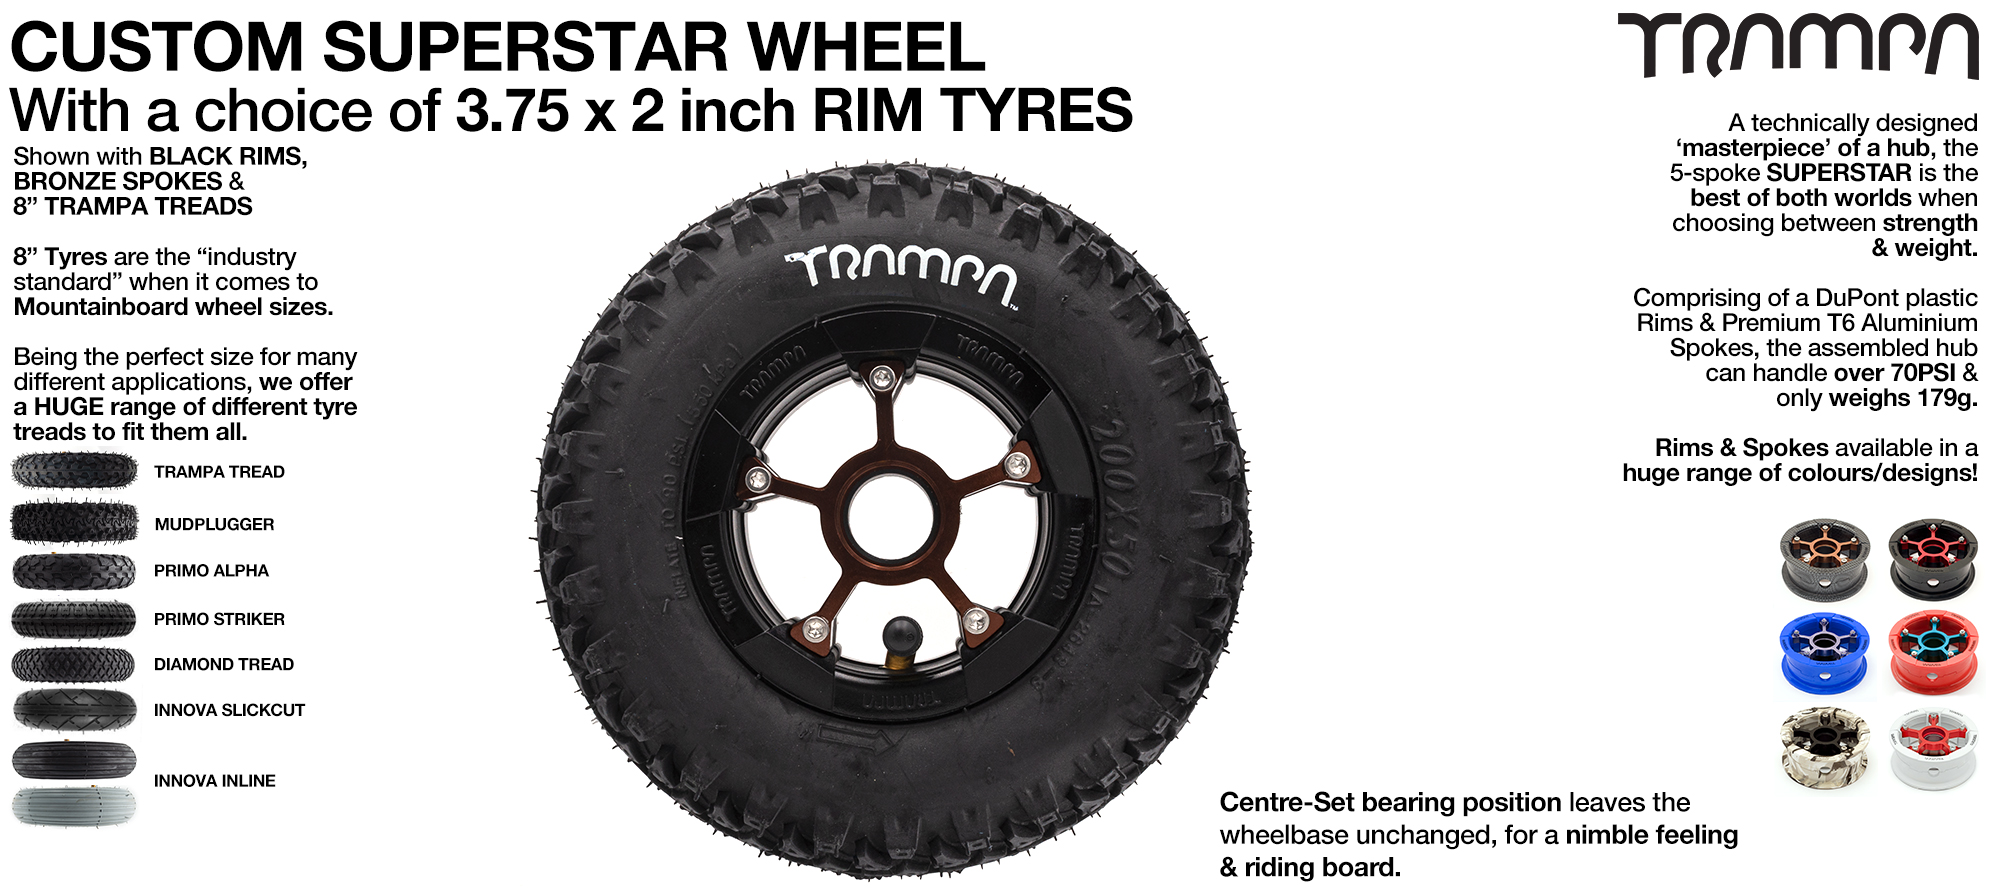 SUPERSTAR WHEEL showing with 8 Inch MUD-PLUGGER Tyre 3.75 x 2 Inch! Build the SUPERSTAR wheel of your dreams!! Any combination possible up to 8 inch Tyres 